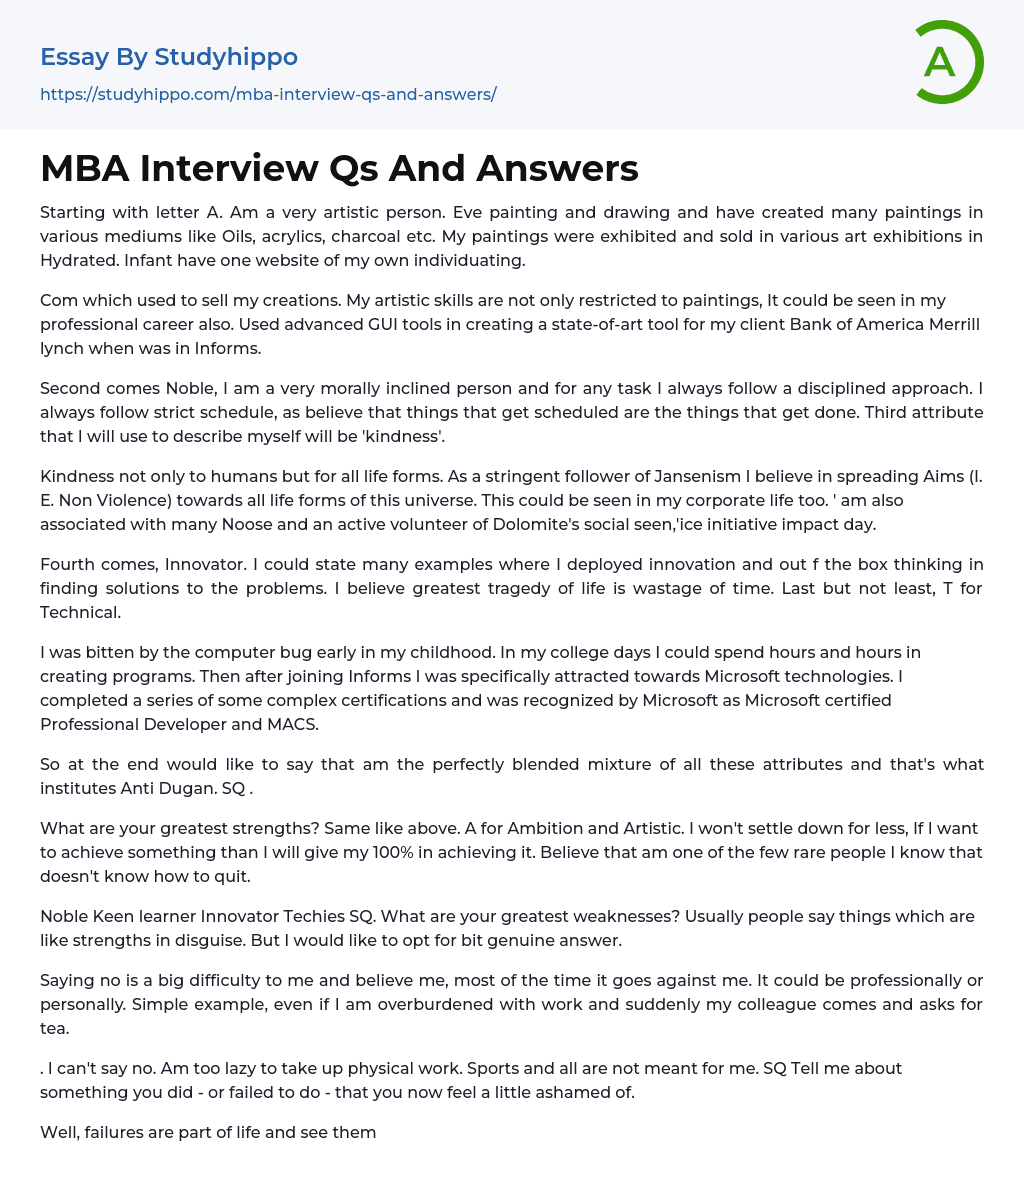 MBA Interview Qs And Answers Essay Example